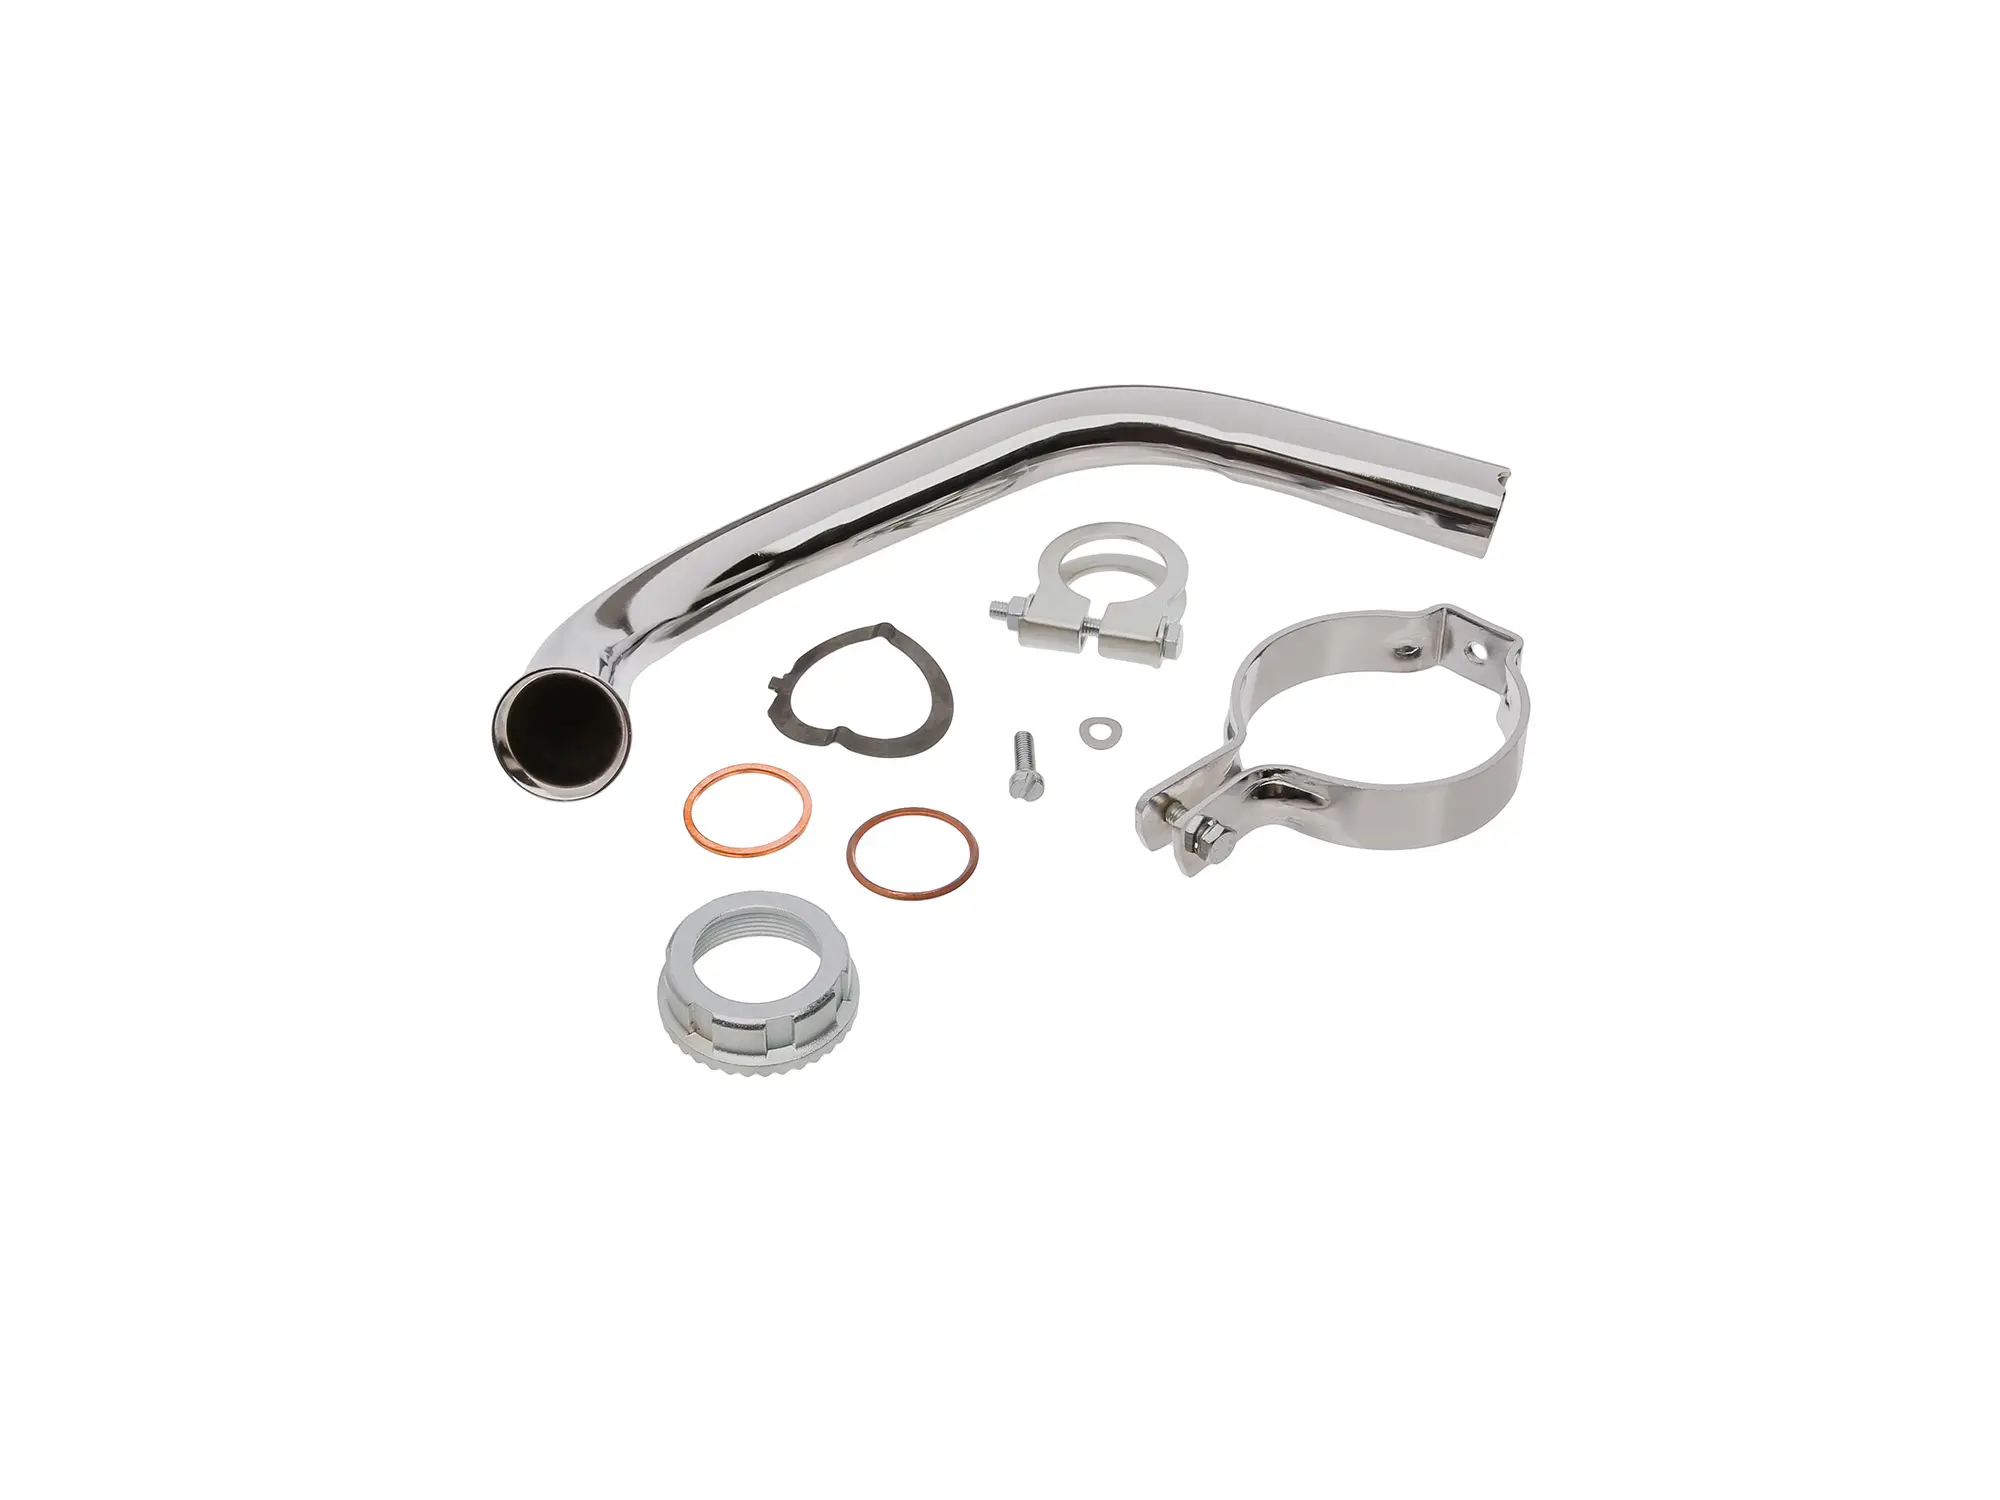 Set: Manifold complete with mounting clamp for exhaust - Simson KR51/2 Schwalbe, Item no: 10061326 - Image 1